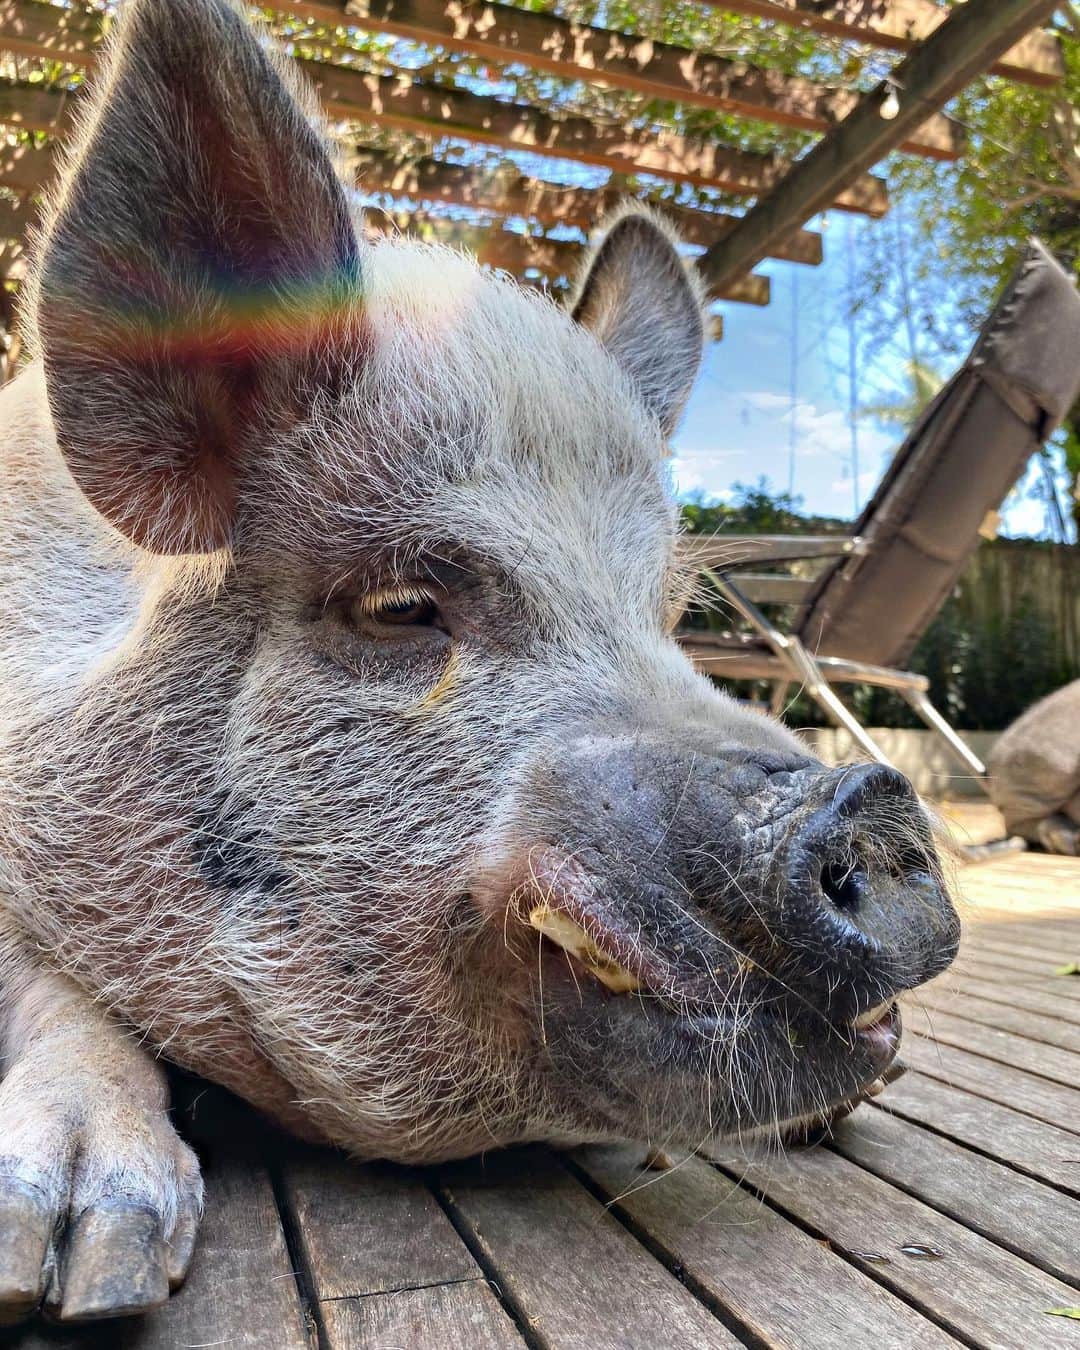 Jamonのインスタグラム：「🎶it’s been a Hard Day’s Night, I have been working like a “pig” ... 🎤🎵 I don’t think so... just chilling and singing  @thebeatles   #harddaysnight #thesingingpig #beatles #jamonthepig #pig #pigs #pigaspets #pet #pets #petsofinstagram #petstagram #pigsofinstagram #pigstagram」